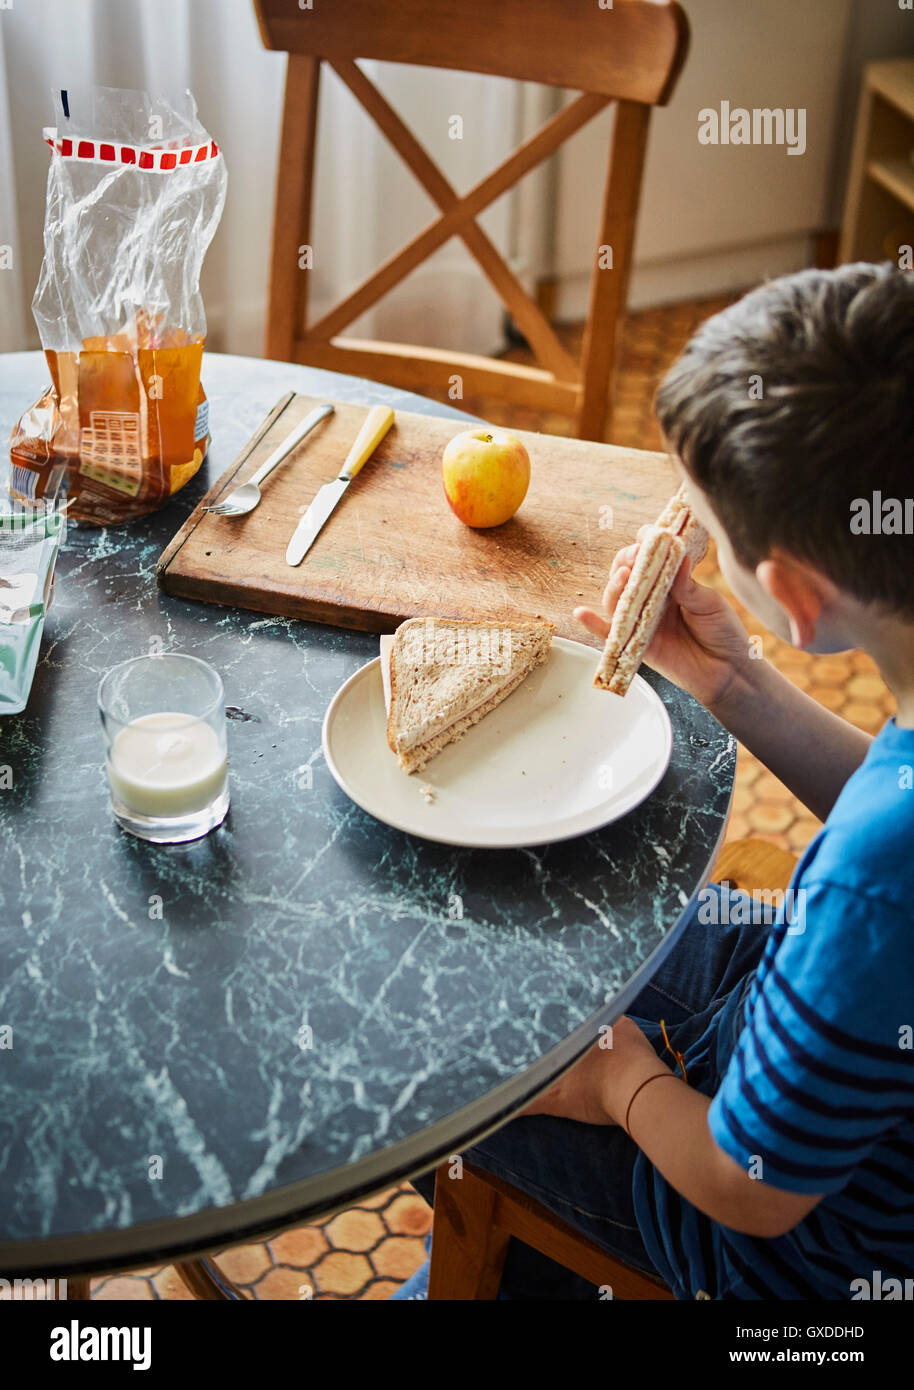 Boy at dining table eating sandwich Stock Photo